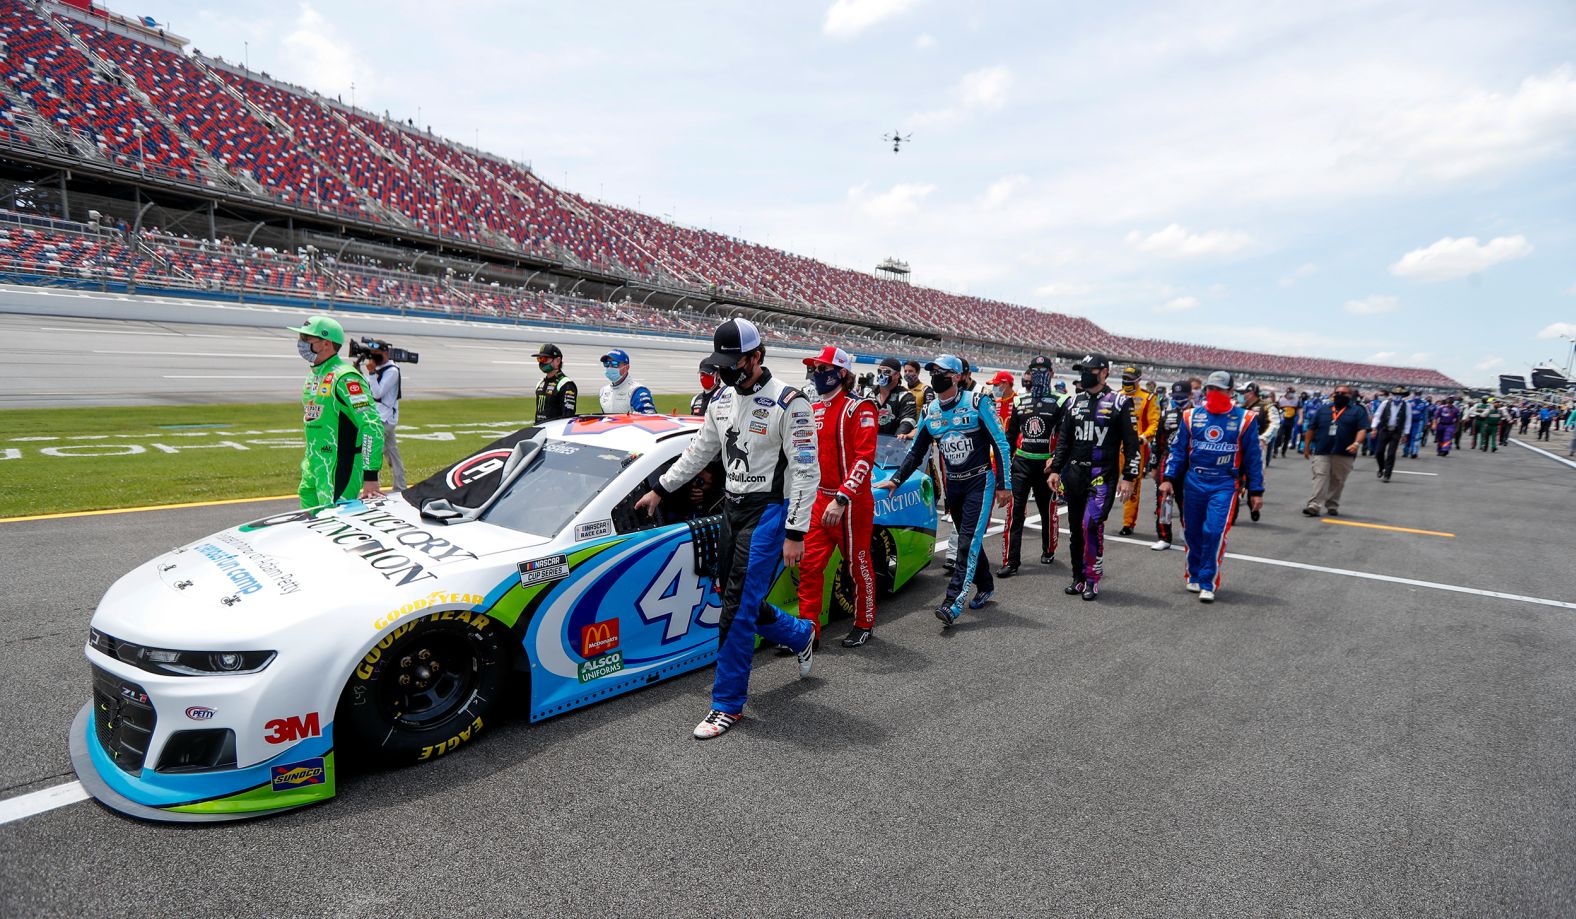 NASCAR drivers, pit crew members and others <a href="index.php?page=&url=https%3A%2F%2Fwww.cnn.com%2F2020%2F06%2F22%2Fus%2Fnascar-race-bubba-wallace-talladega%2Findex.html" target="_blank">show their support for Bubba Wallace</a> as they walk alongside his No. 43 car before a Cup Series race in Talladega, Alabama, on June 22. Wallace, the only Black driver in NASCAR's top circuit, has been an outspoken advocate of the Black Lives Matter movement and the corresponding protests against racism and police brutality. A noose was found in his garage stall on Sunday. The FBI investigated and concluded that the noose was a garage-door pull rope that had been in place as early as October 2019 -- well before it had been assigned to Wallace's team.